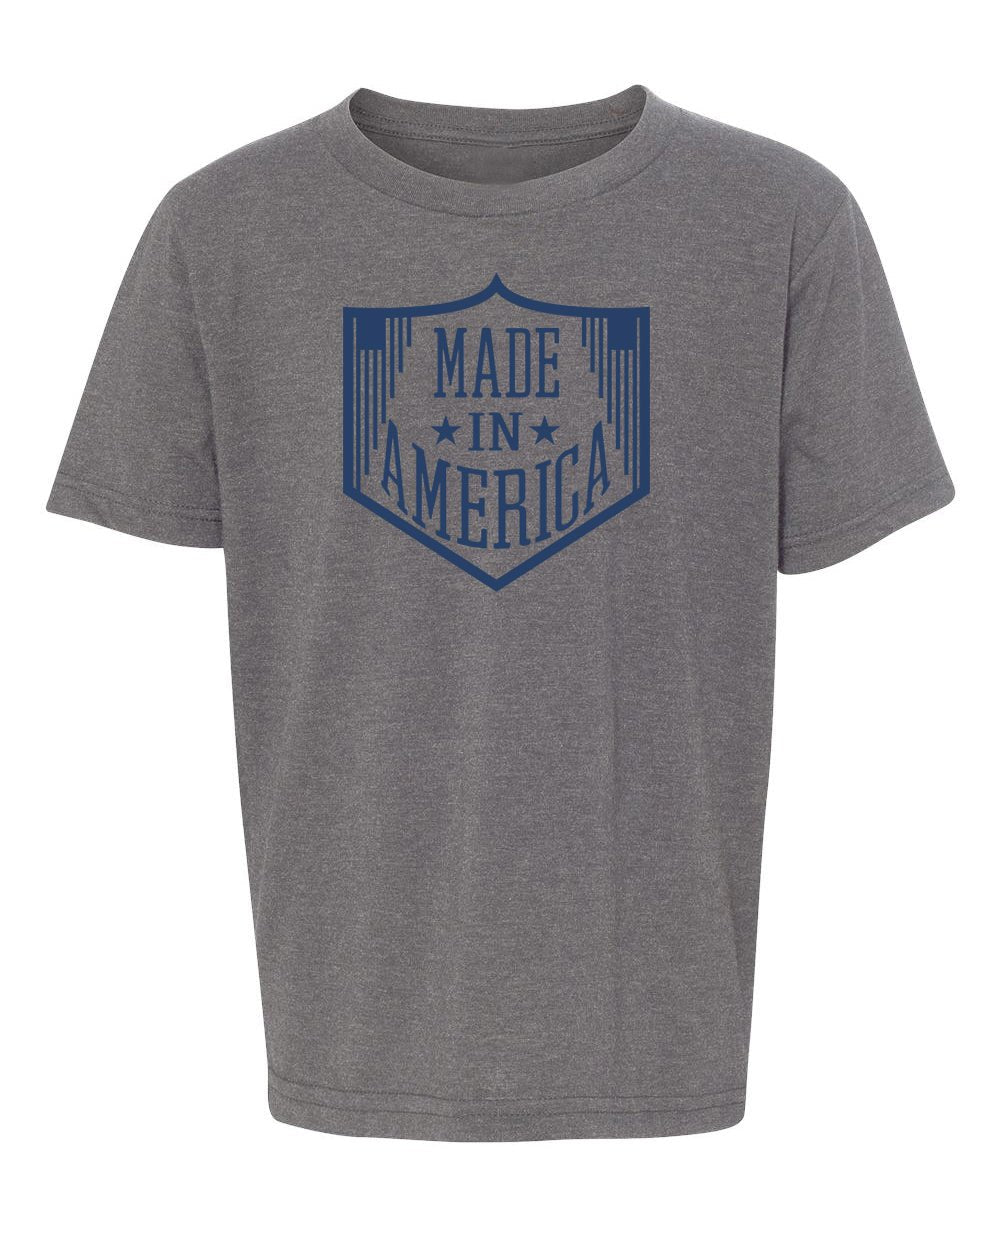 Made in America Kids 4th of July T Shirts - Mato & Hash